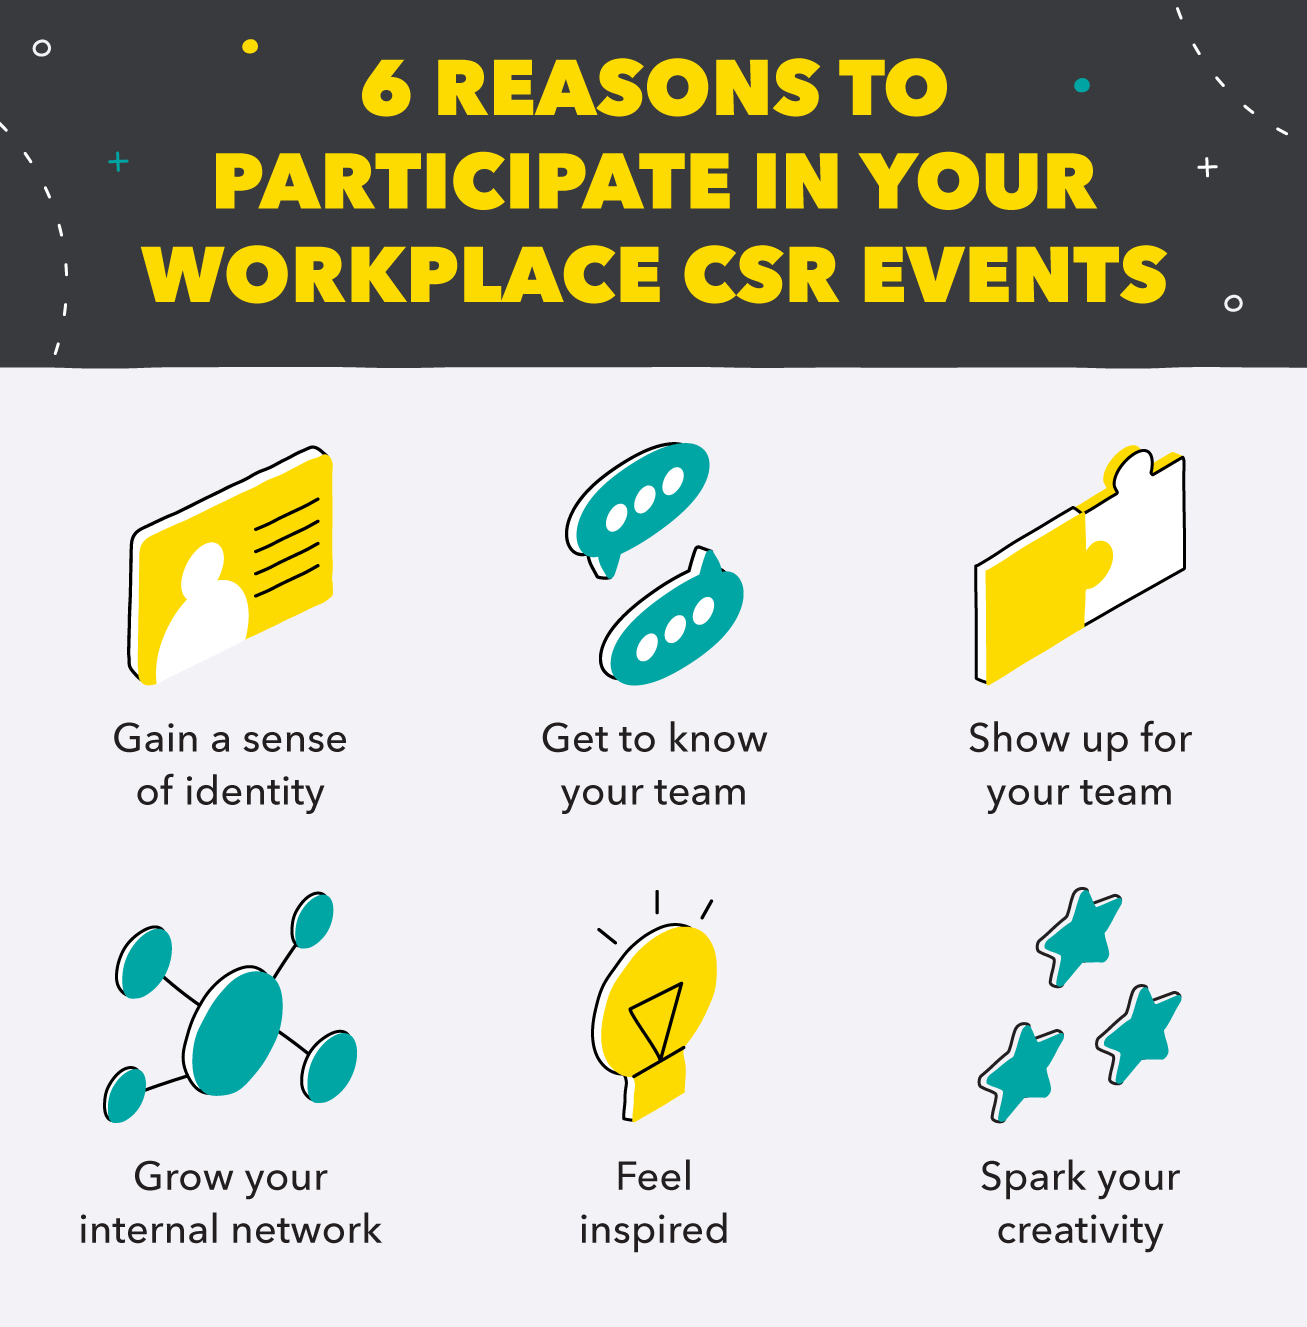 6 Reasons to Participate in CSR